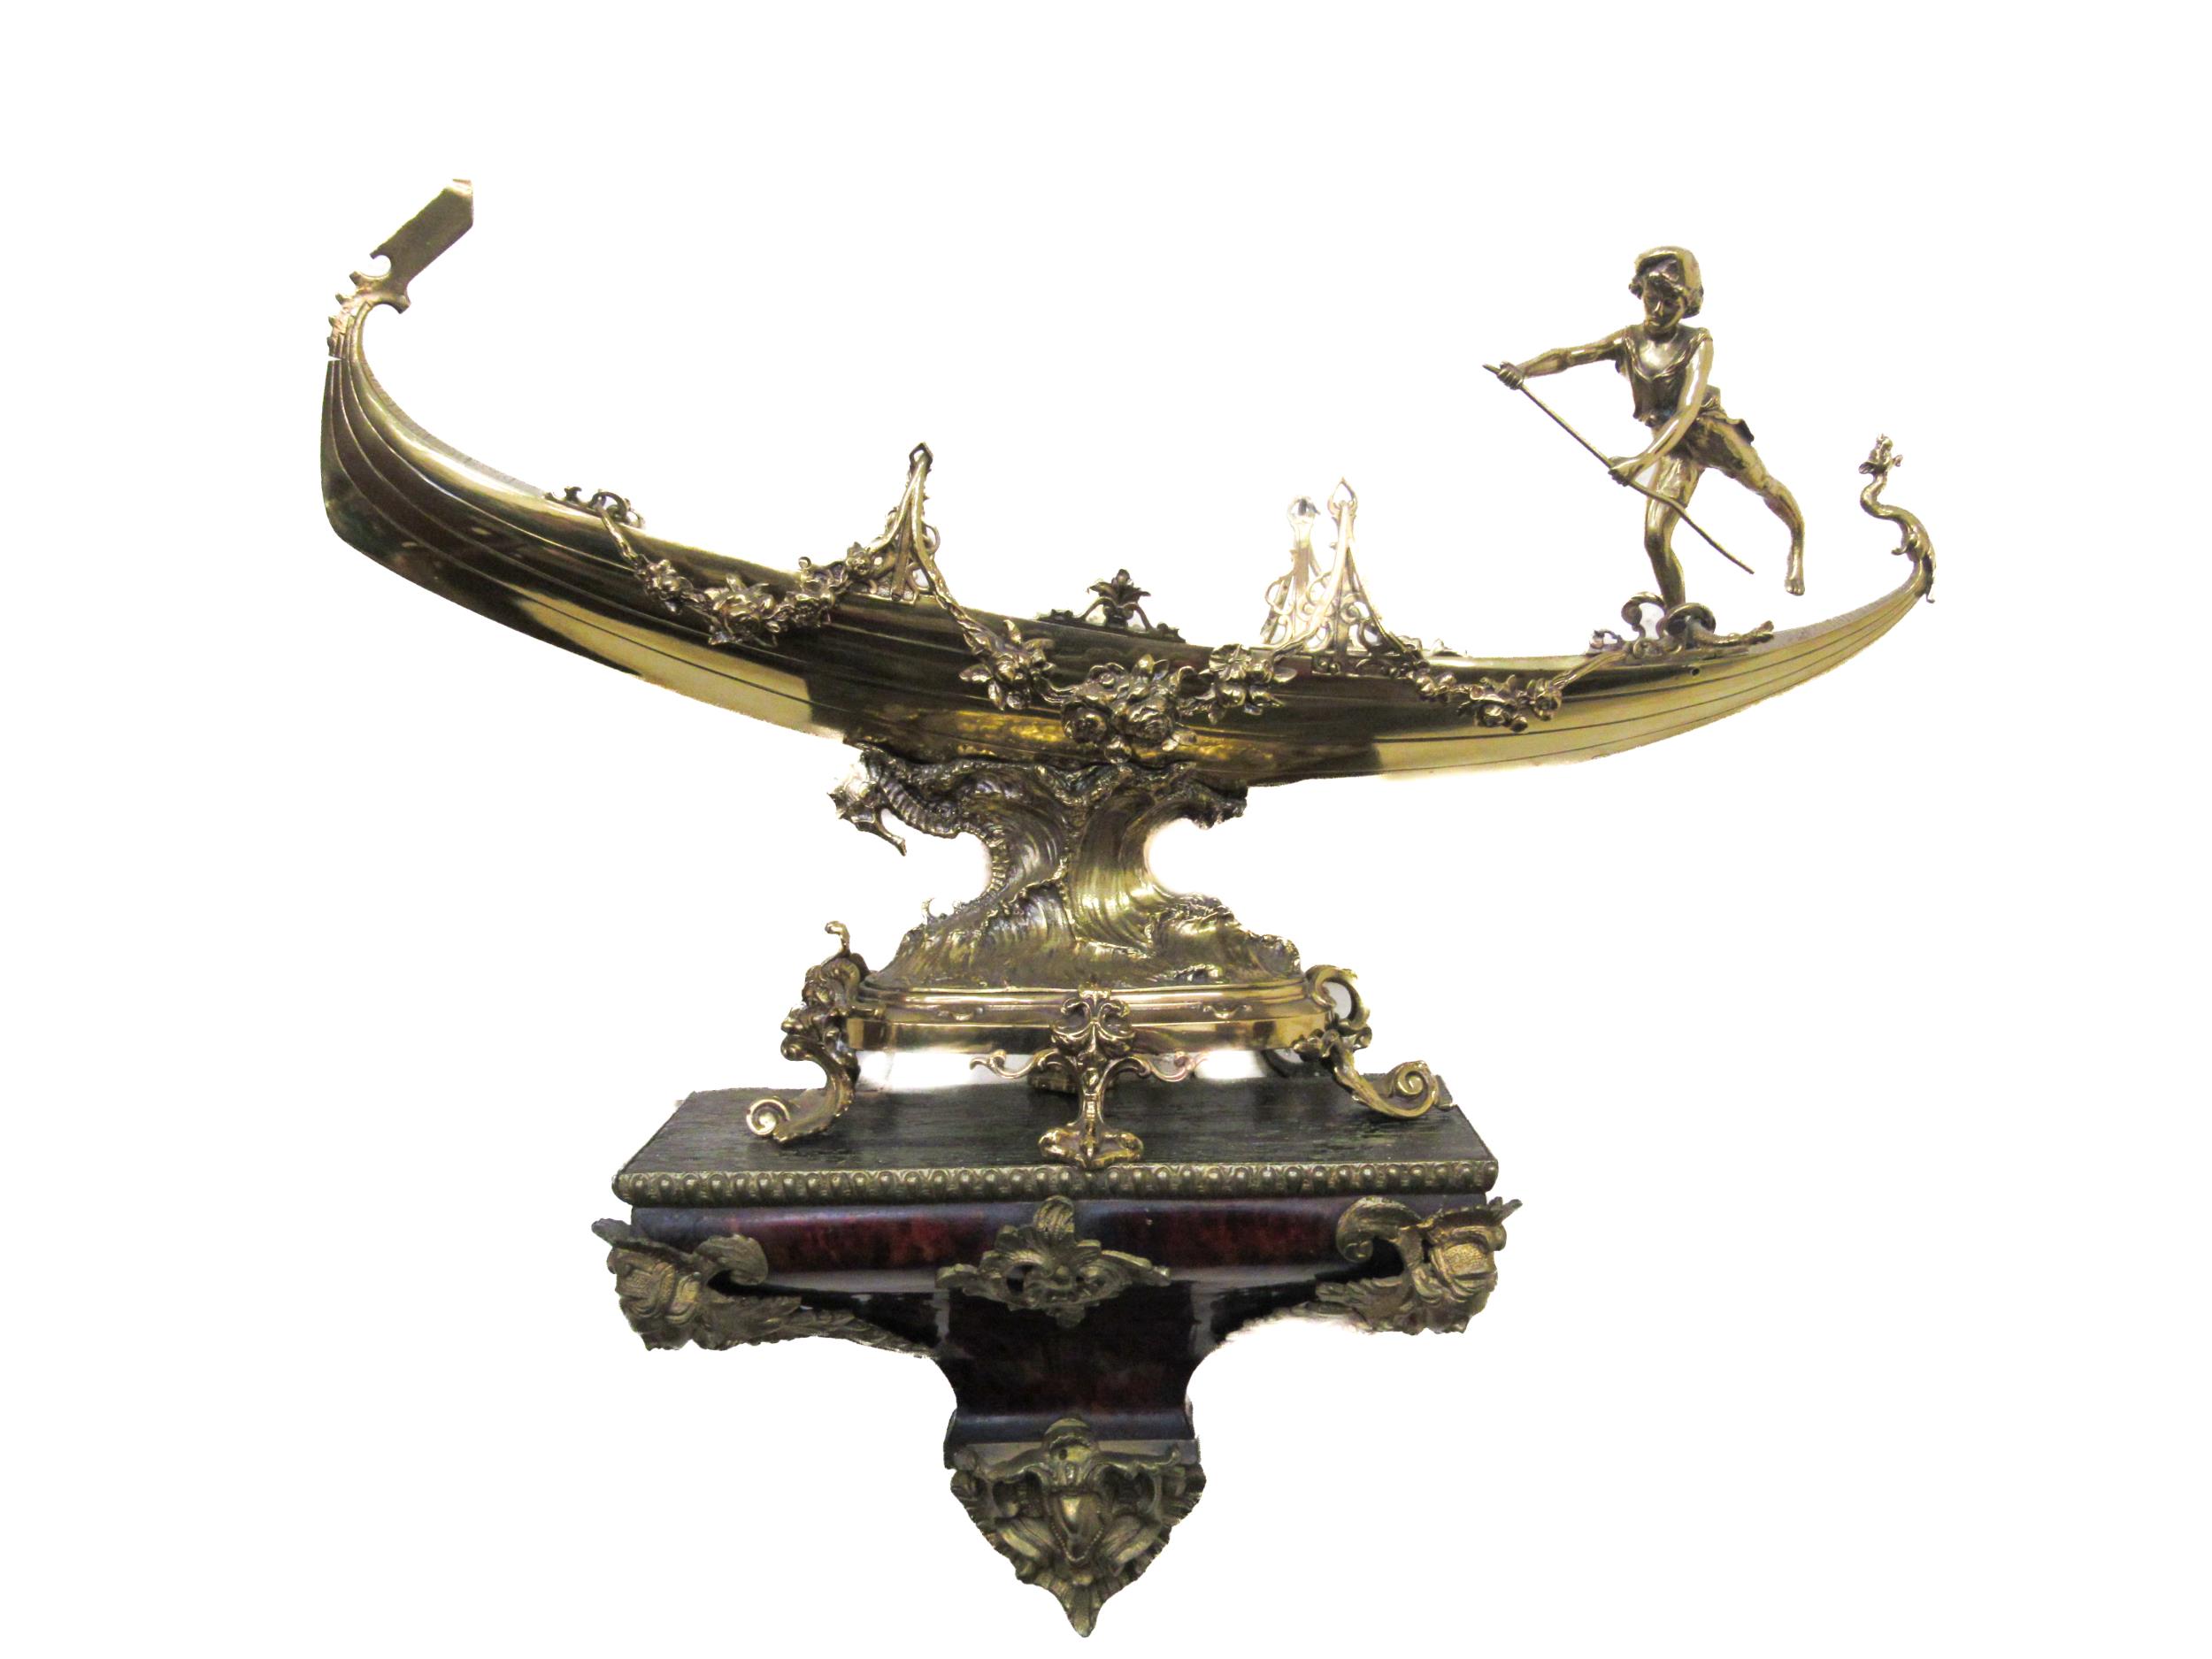 An attractive and ornate brass Model, of a Gondola and Gondolier, embellished with floral garlands